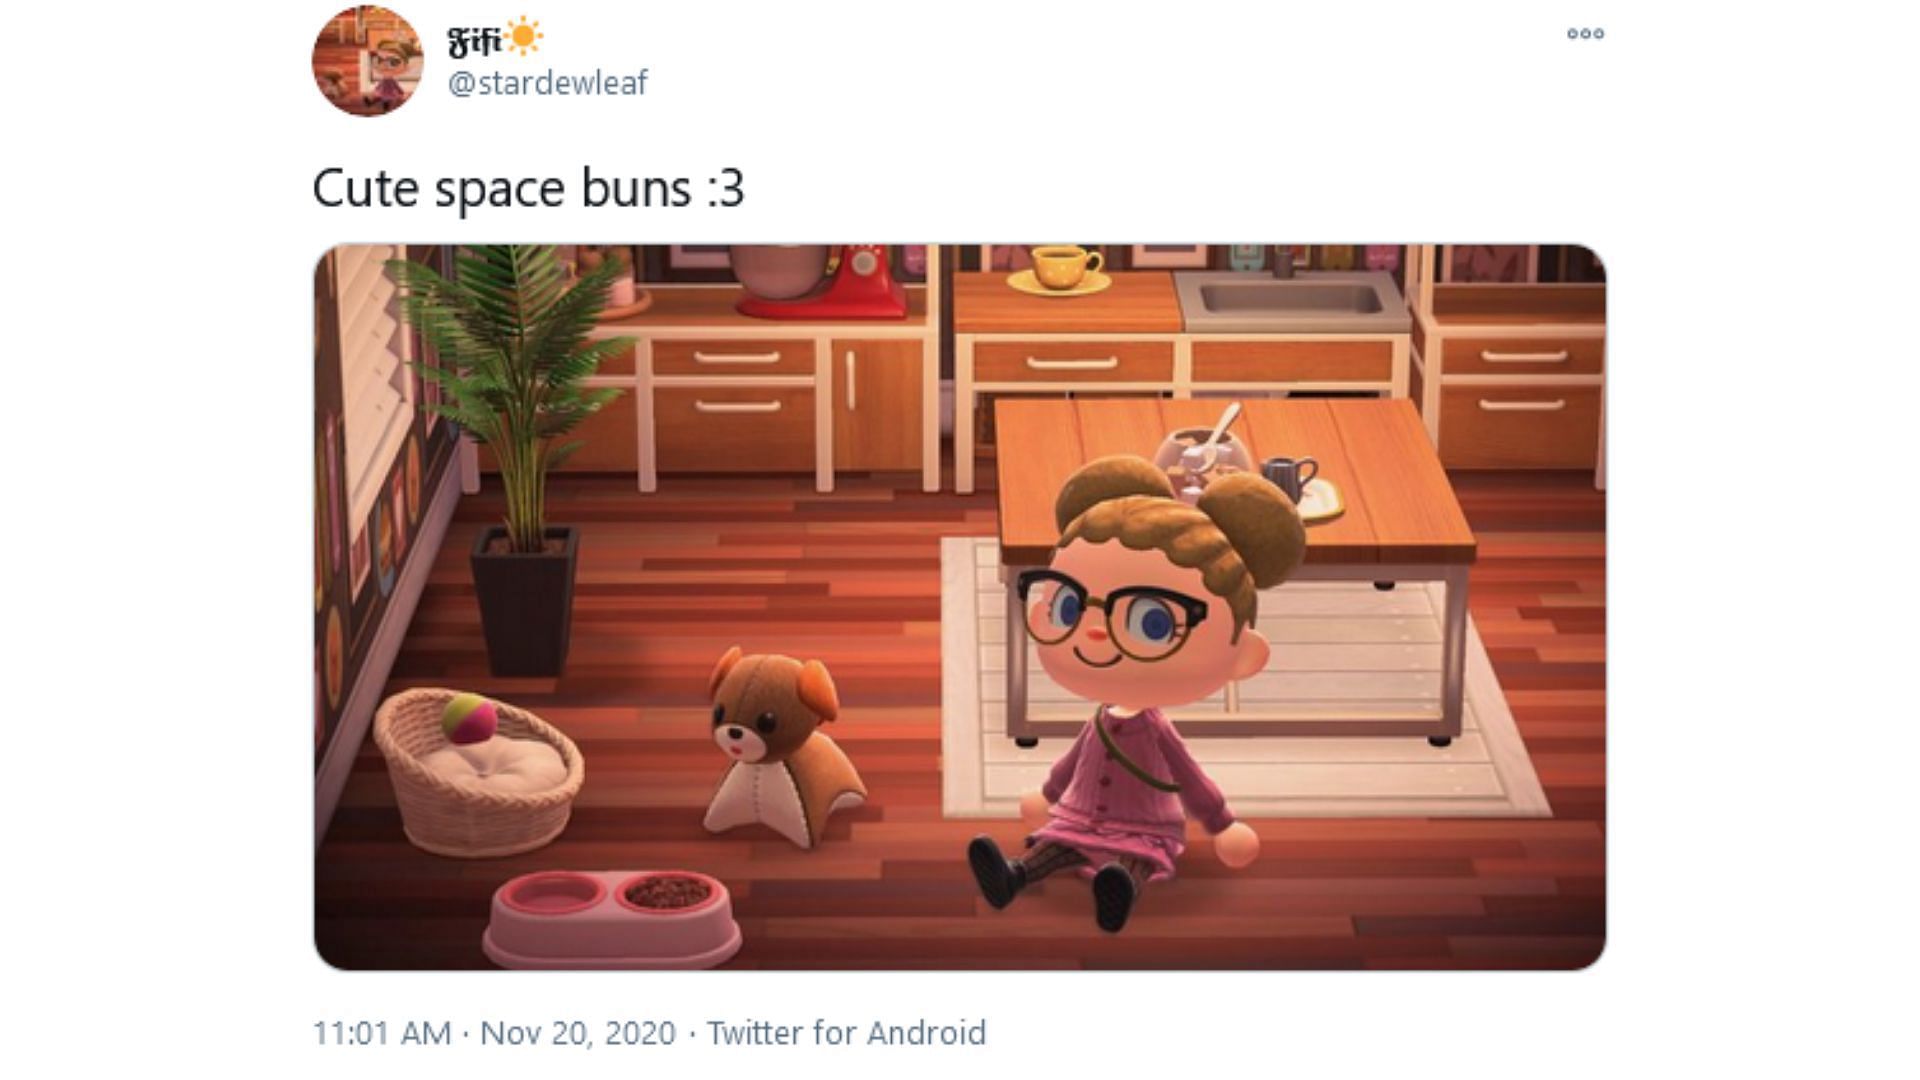 The space buns tweet that went viral in the Animal Crossing: New Horizons community (Image via Bounding into Comics)